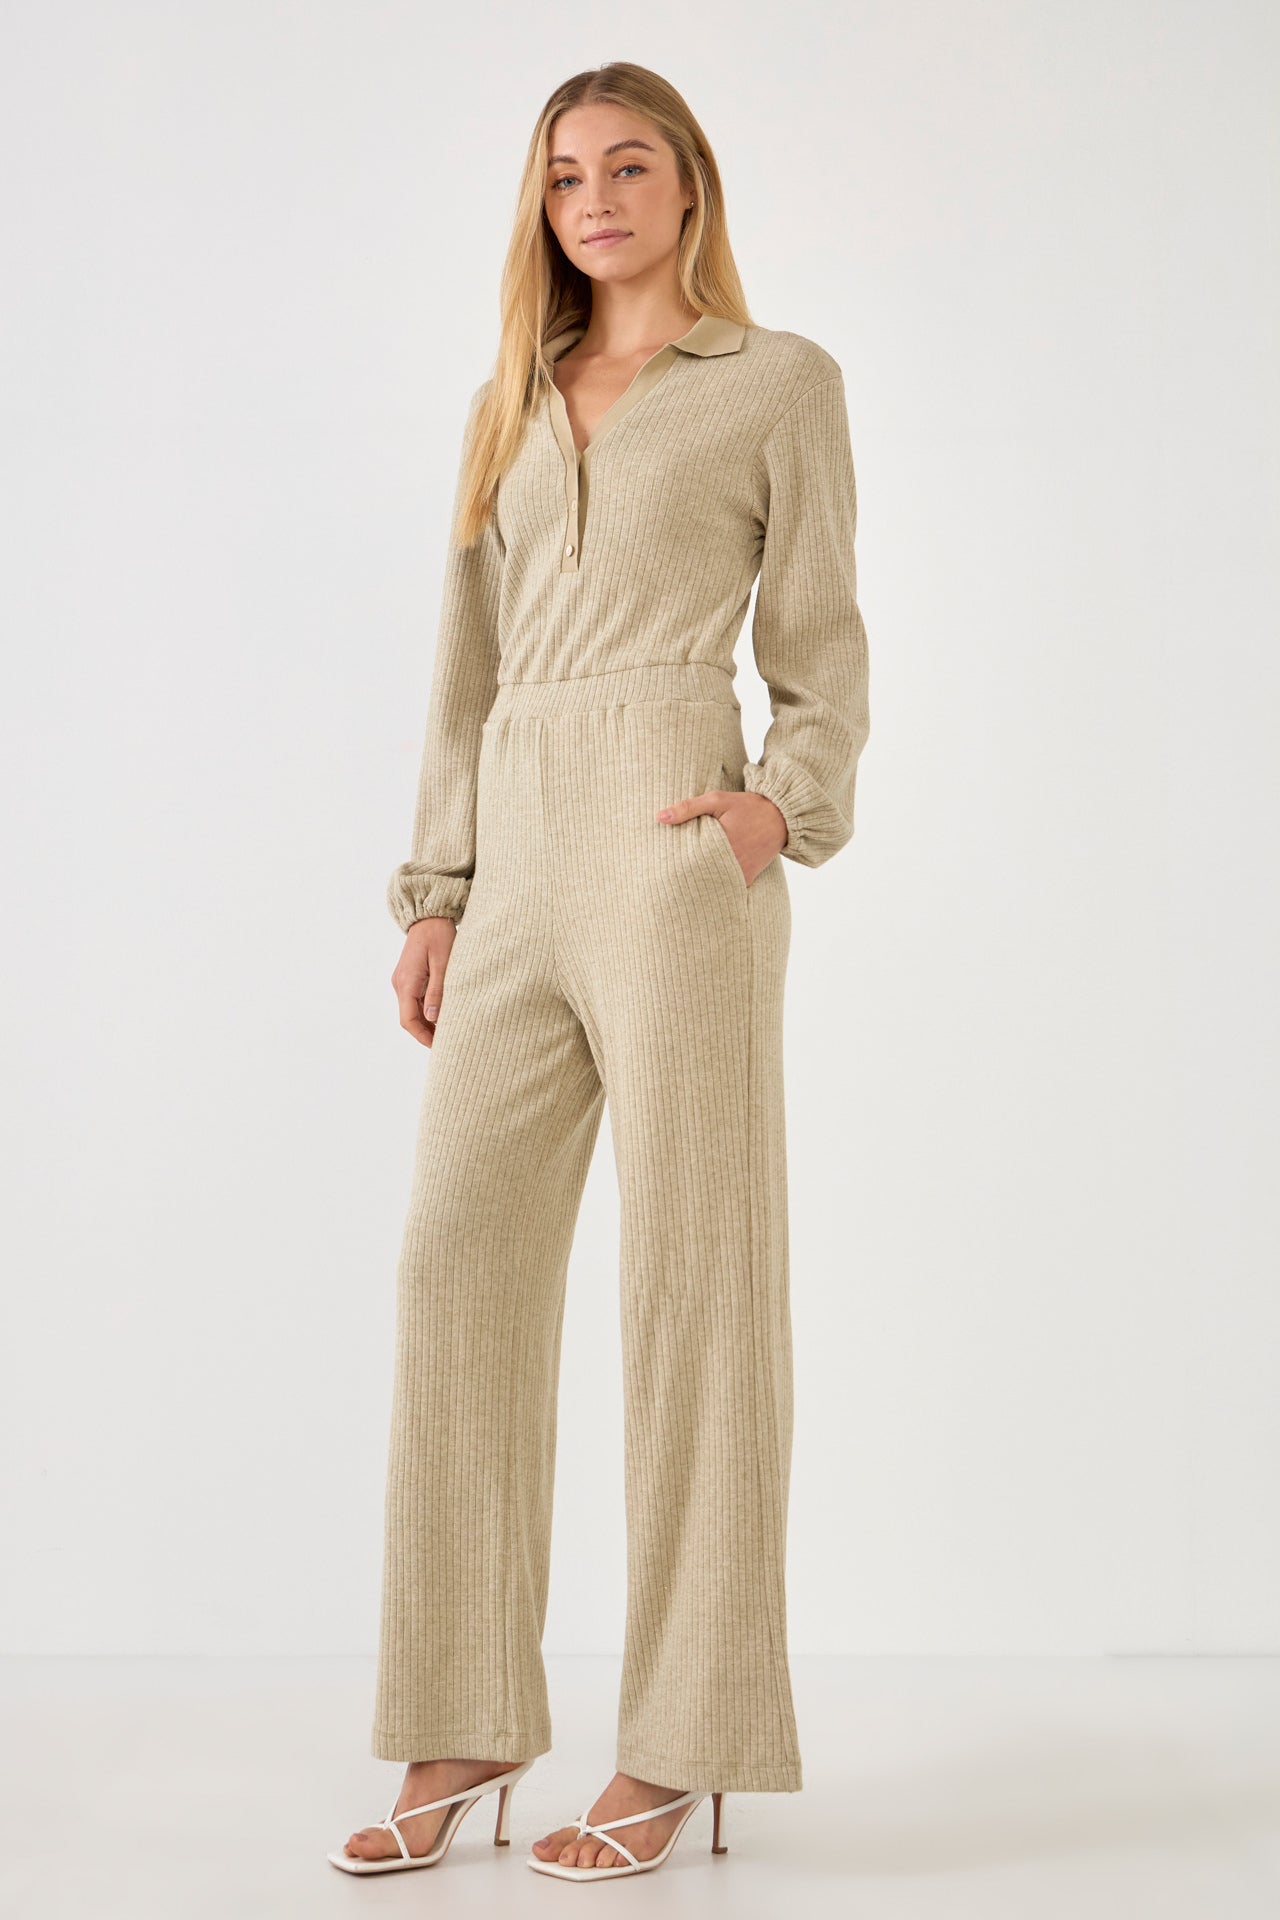 FREE THE ROSES - Collared Knit Jumpsuit - JUMPSUITS available at Objectrare